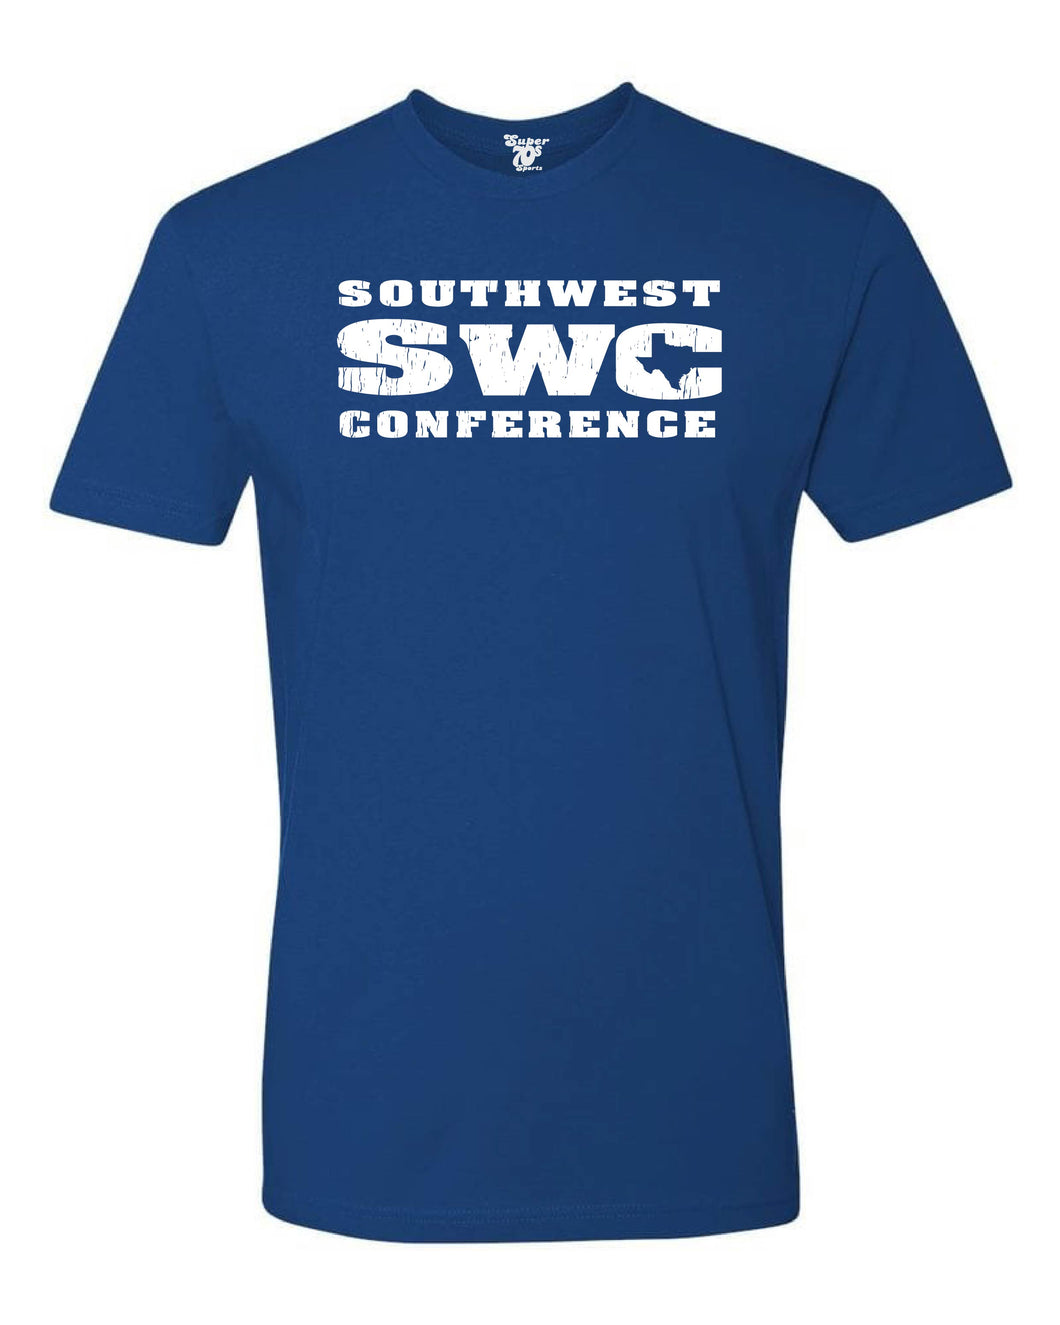 Southwest Conference Royal Tee